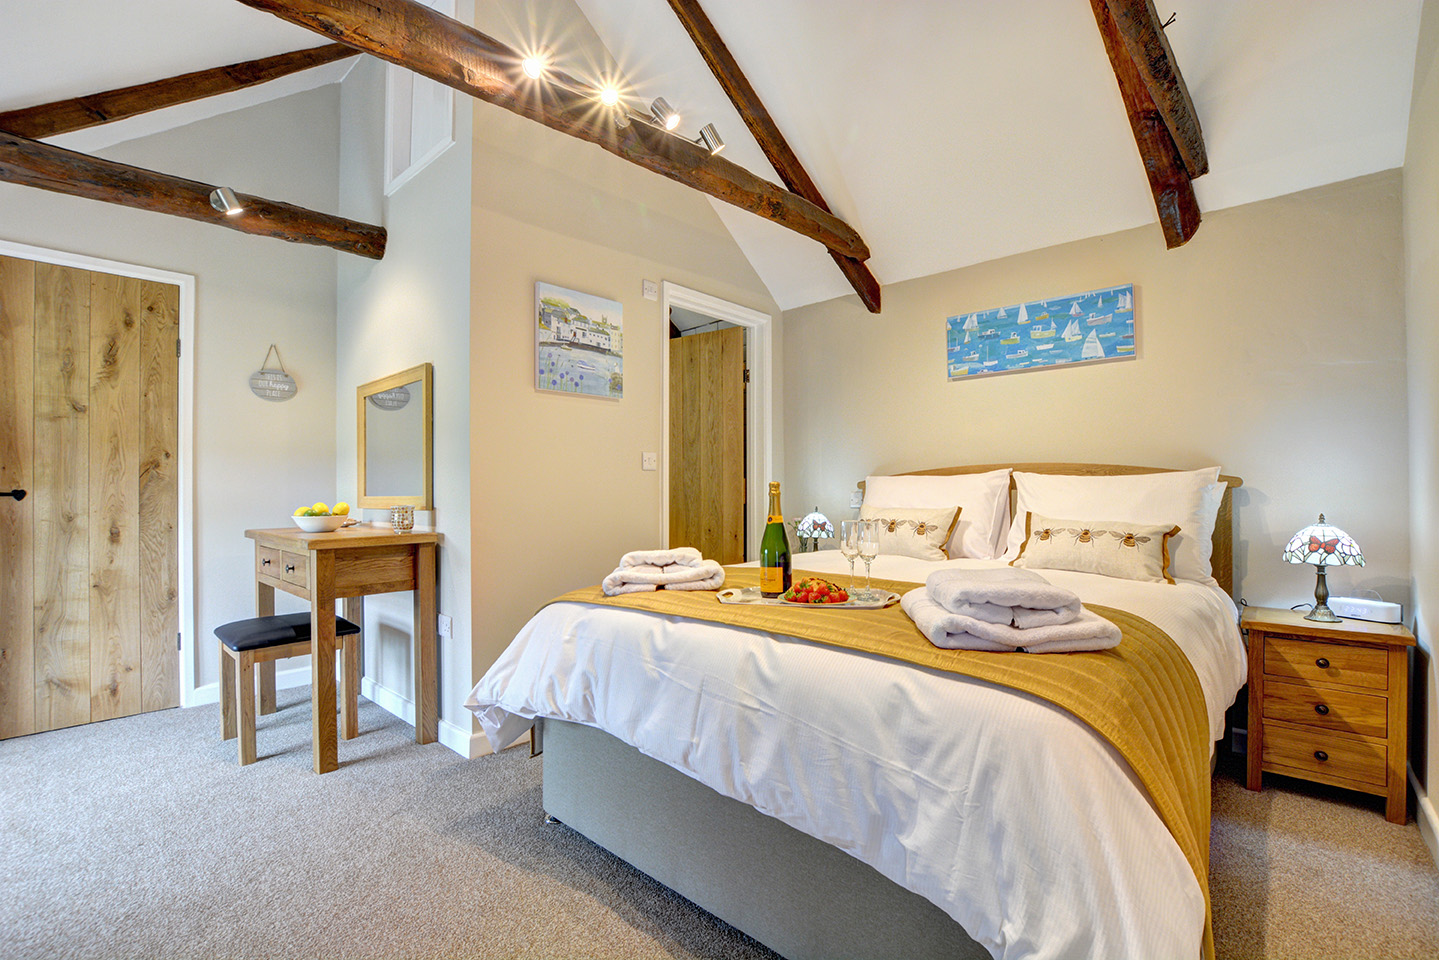 The bedroom of The Linney self catering cottage converted barn at Penrose Burden holiday cottages in Cornwall 01.jpg